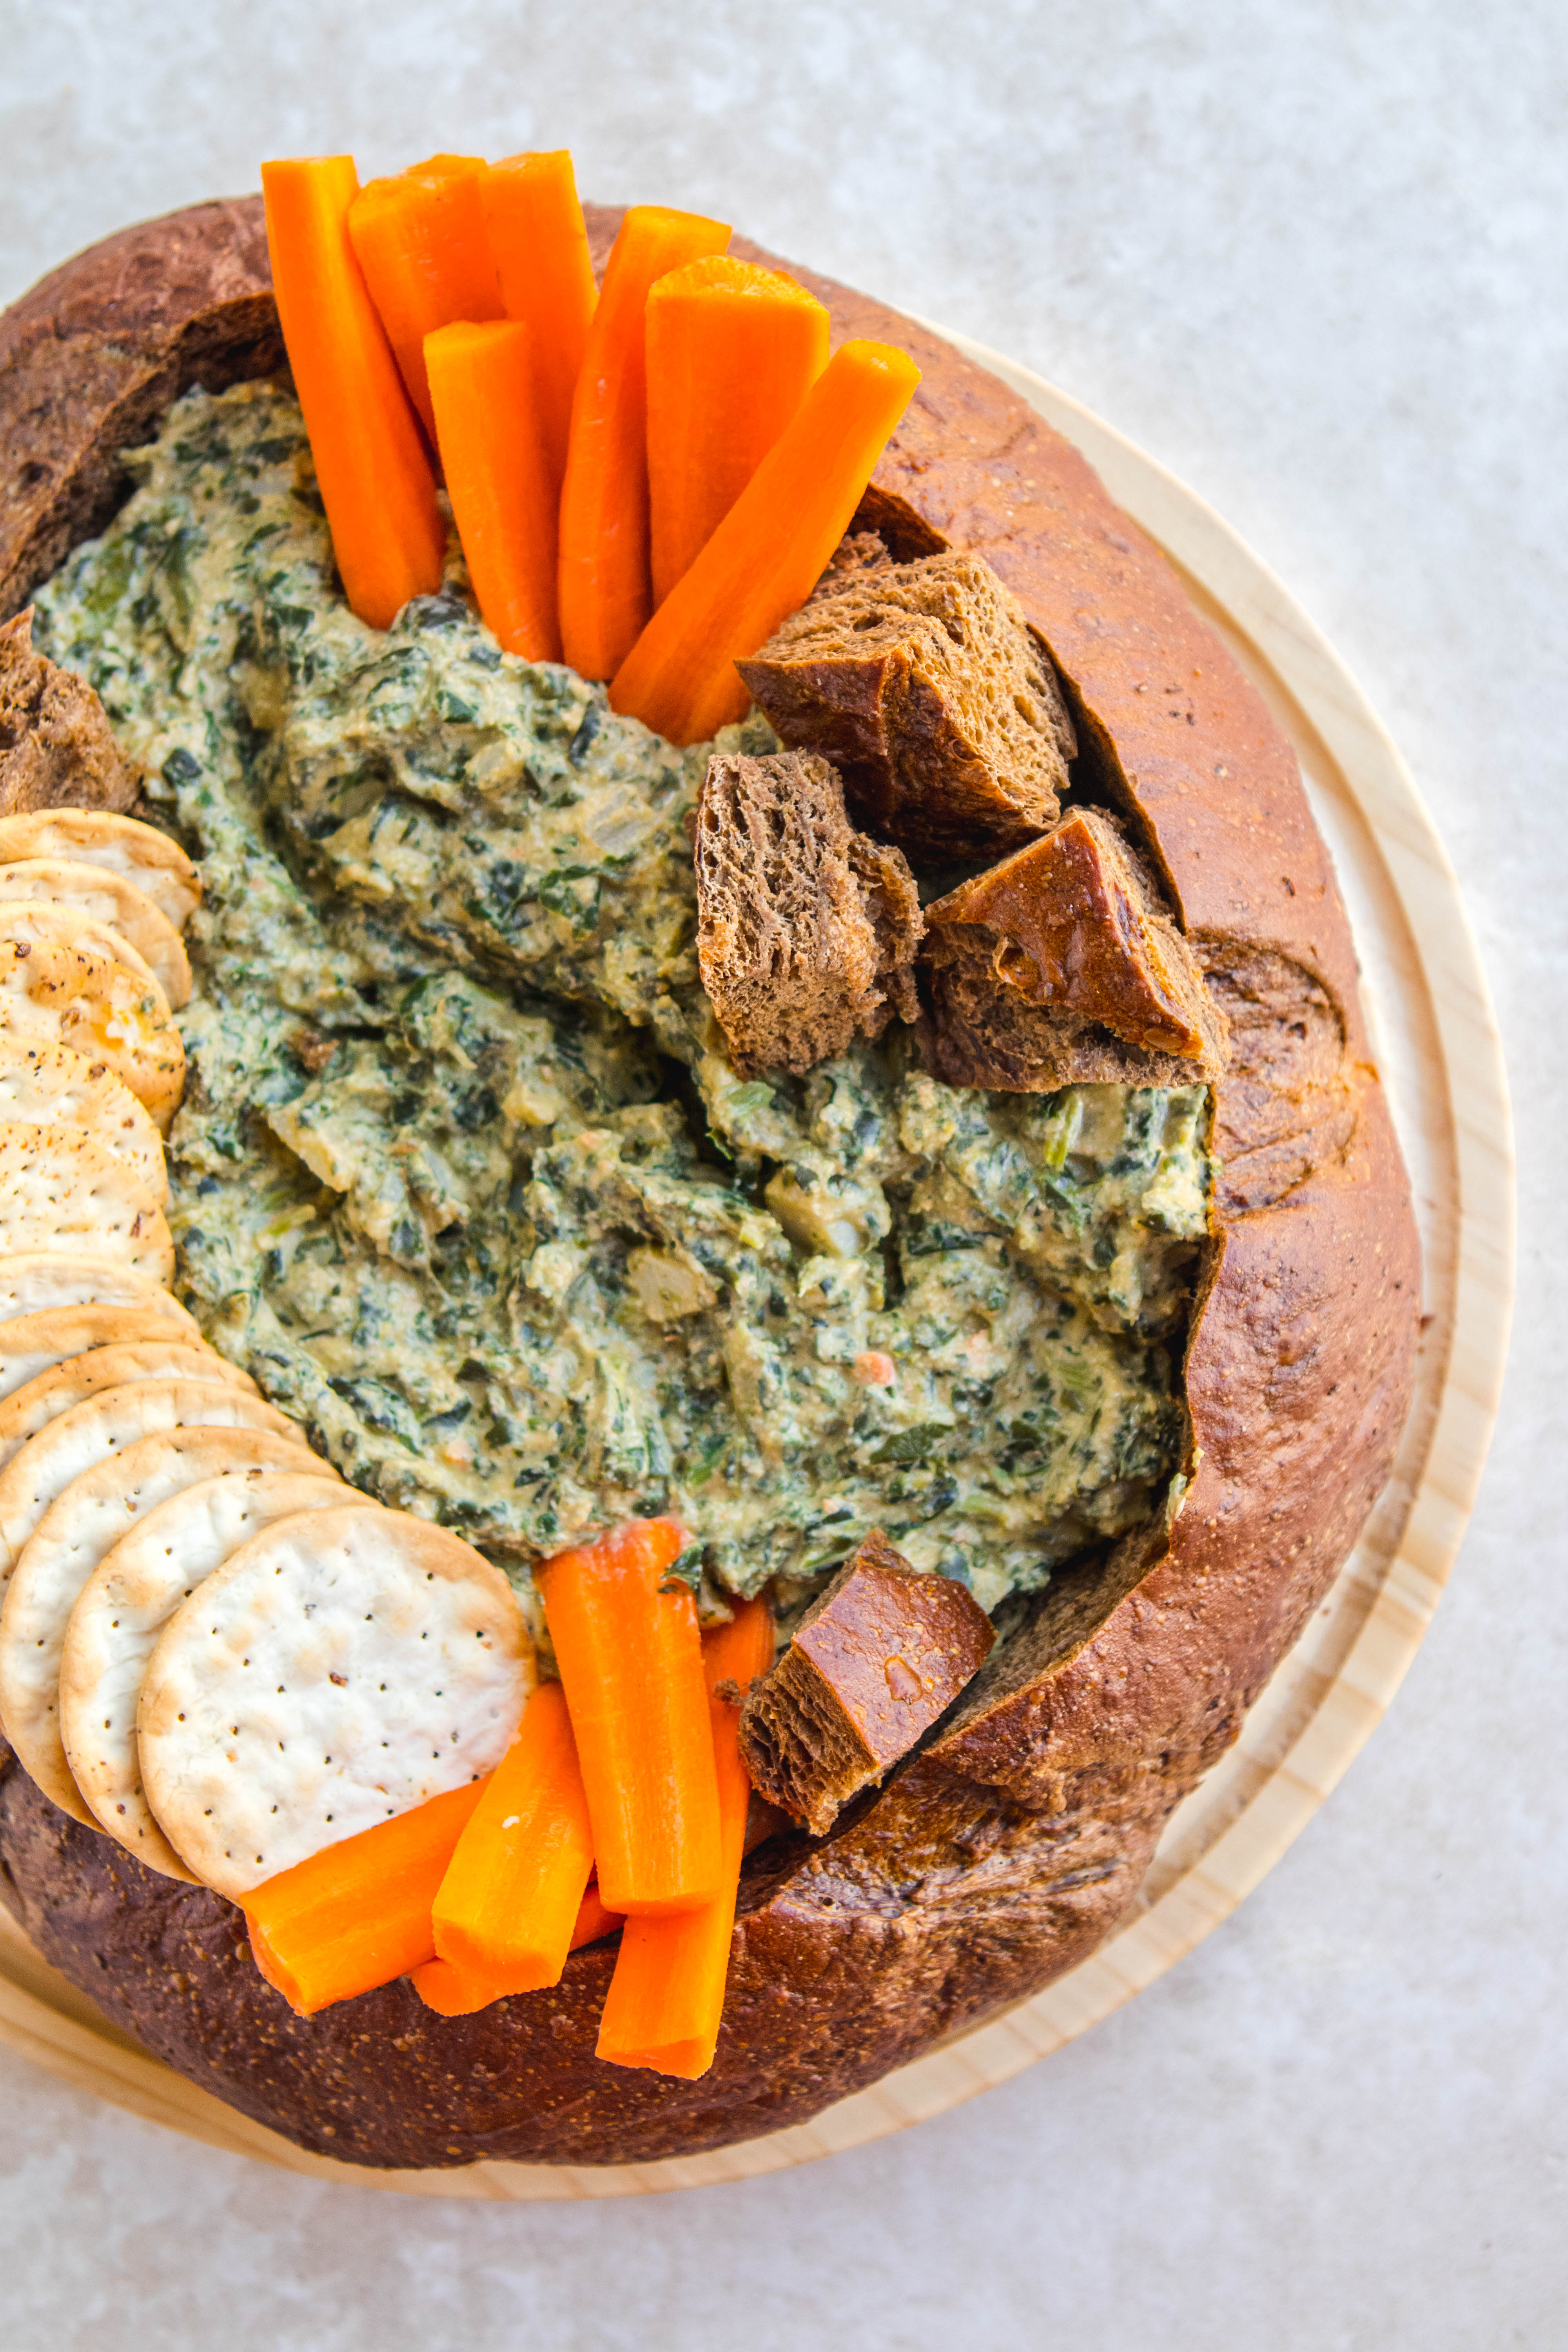 appetizers clipart spinach dip